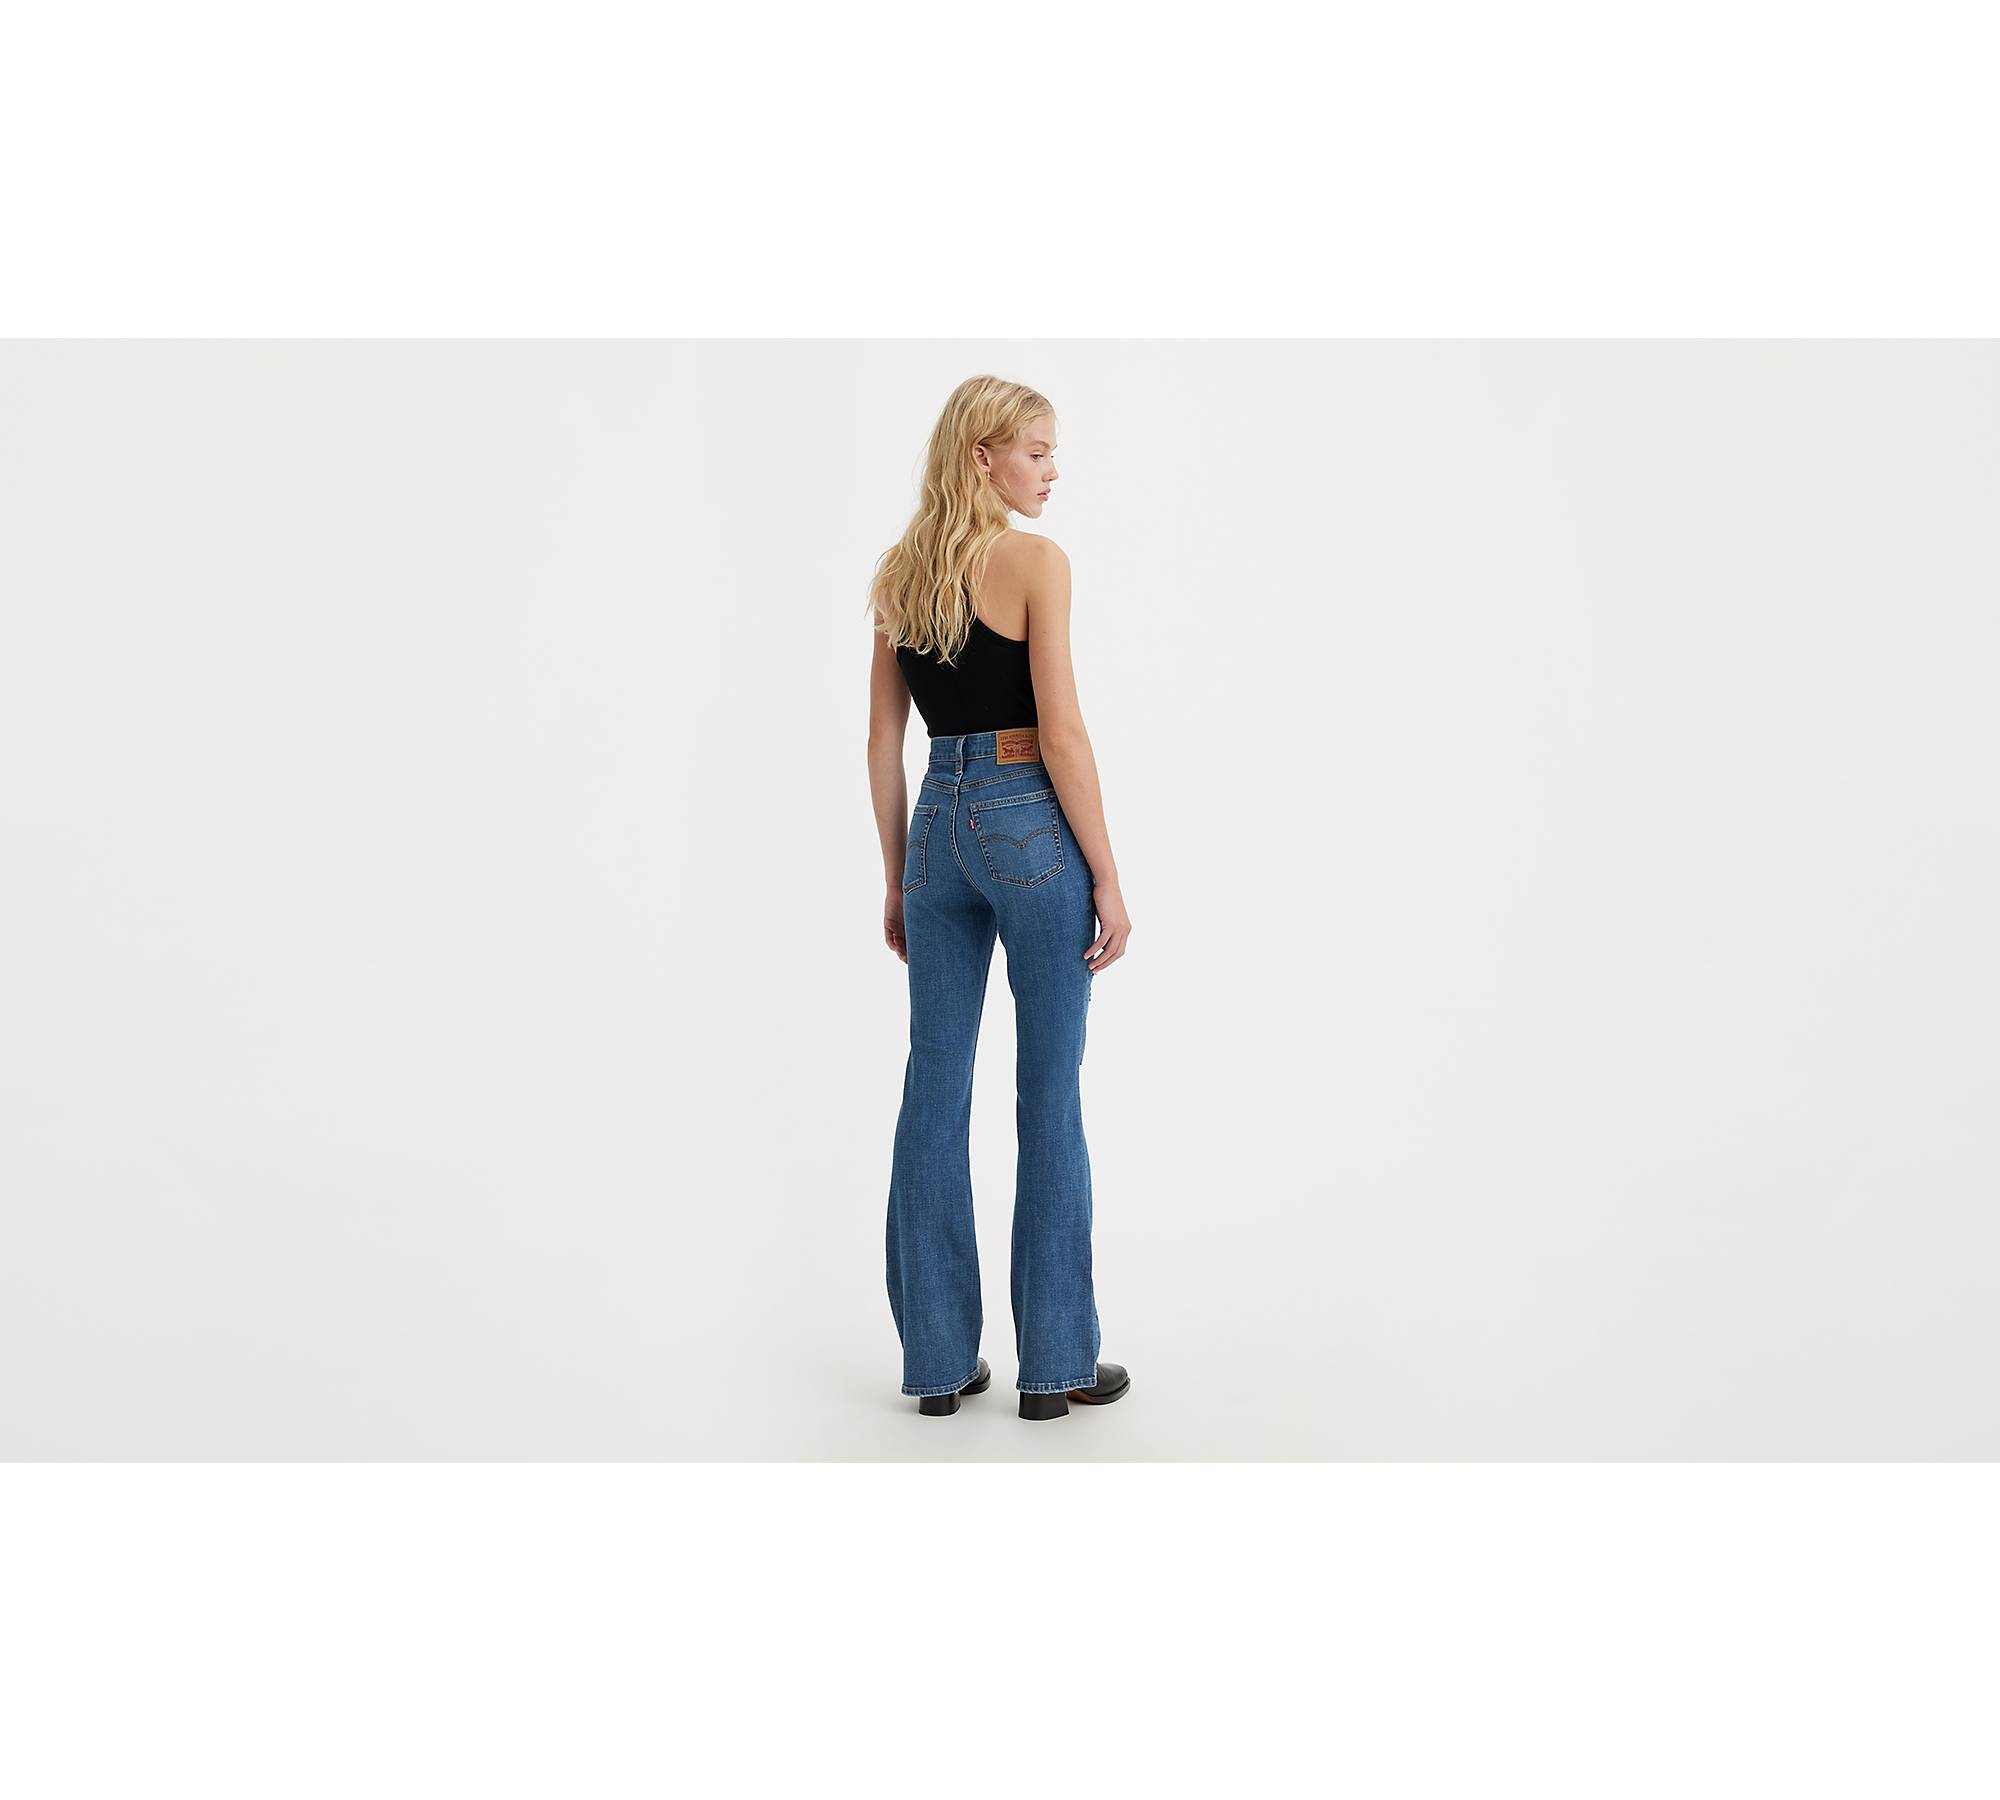 The Perfect Pant, Hi-Rise Flare - Navy